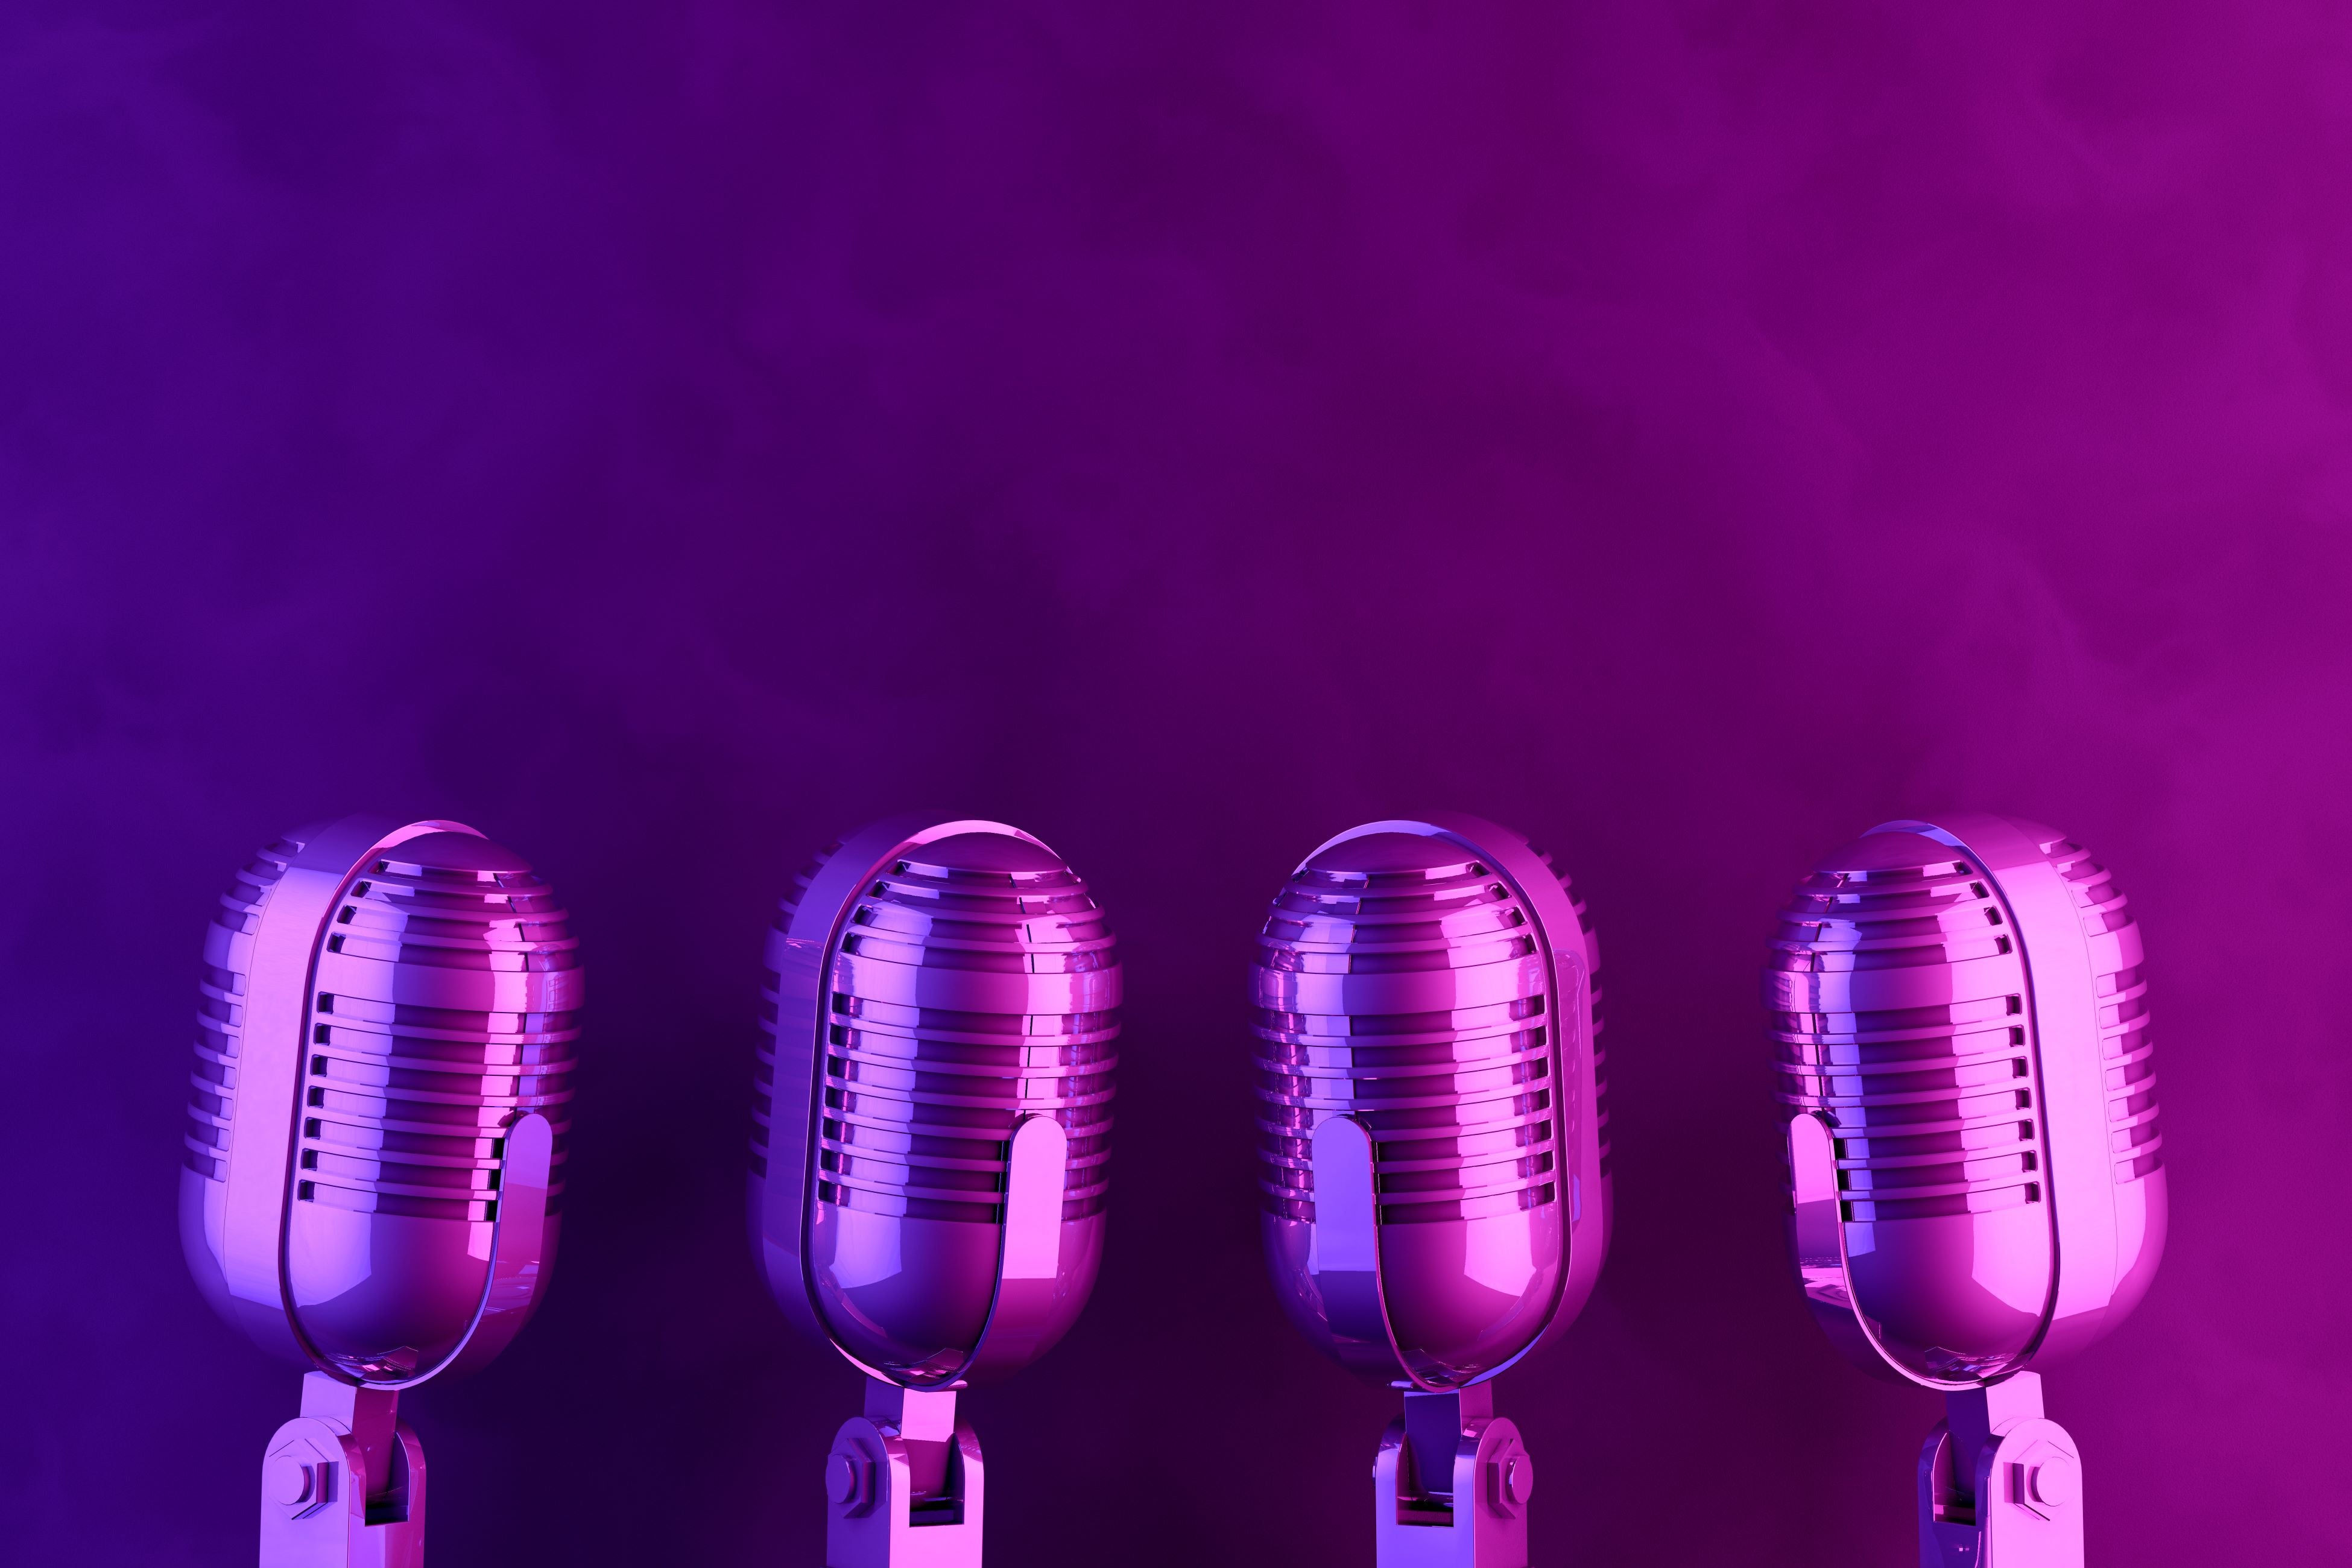 Four antique microphones reflecting purple light are lined up in a row in front of a purple background.